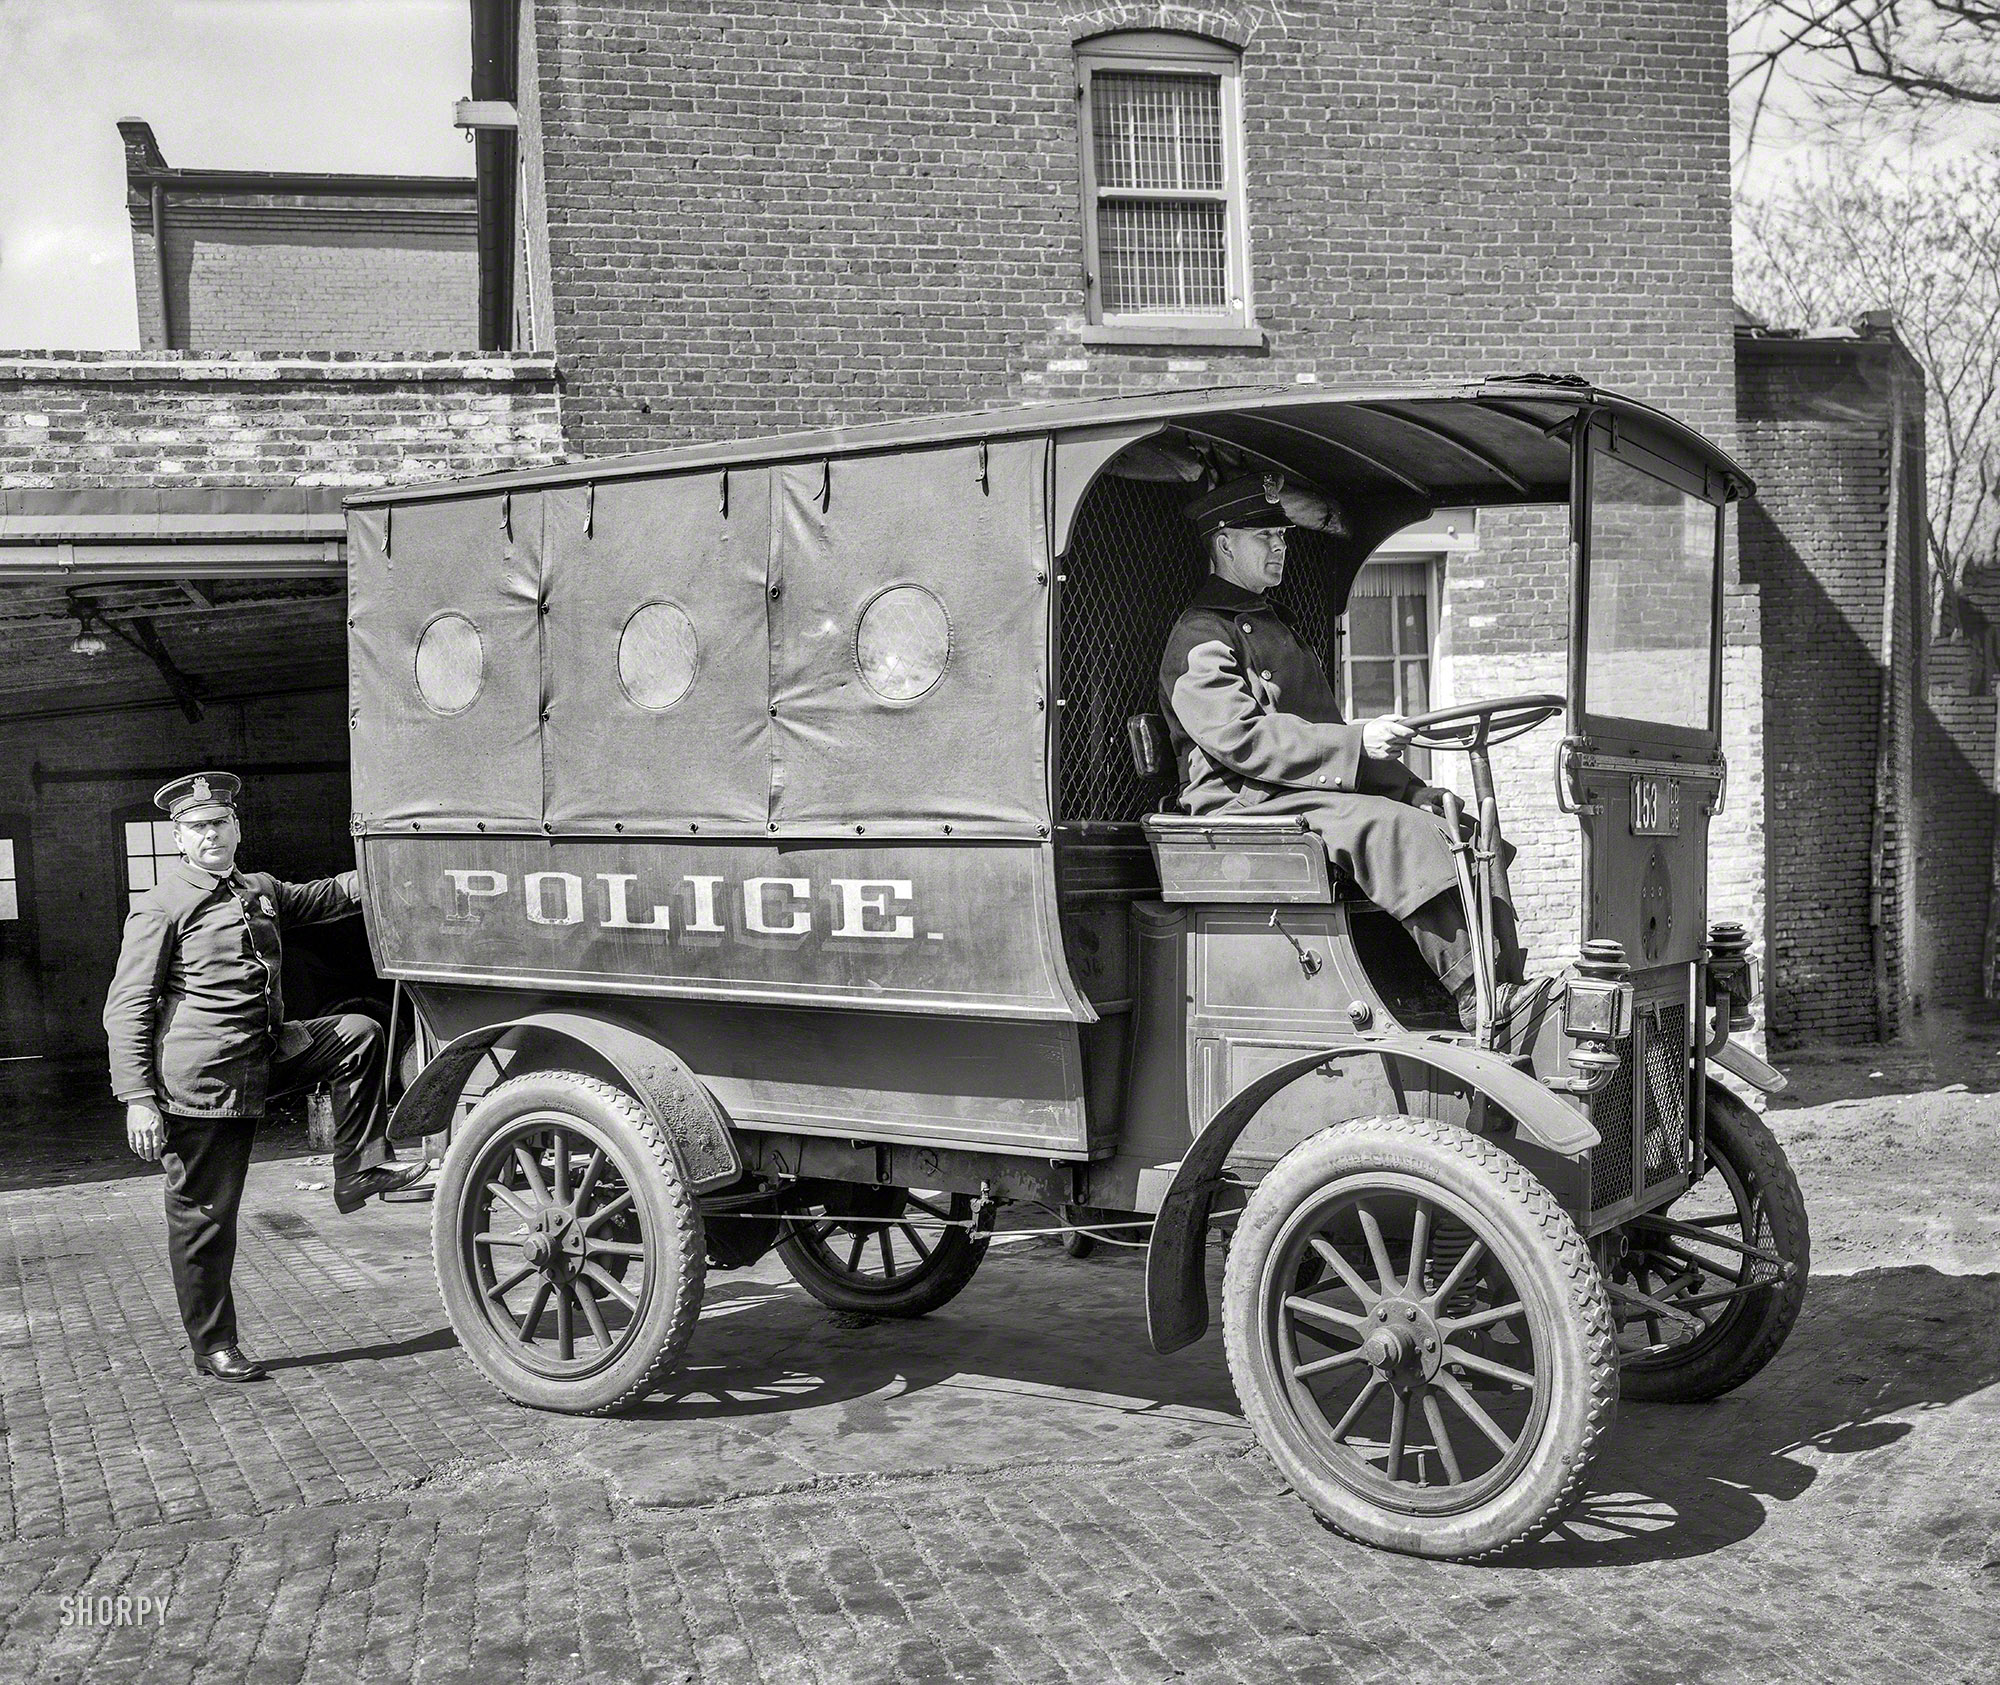 Washington, D.C., 1919. "Franklin Motor Car Co. police van." The latest in law enforcement. Harris & Ewing Collection glass negative. View full size.